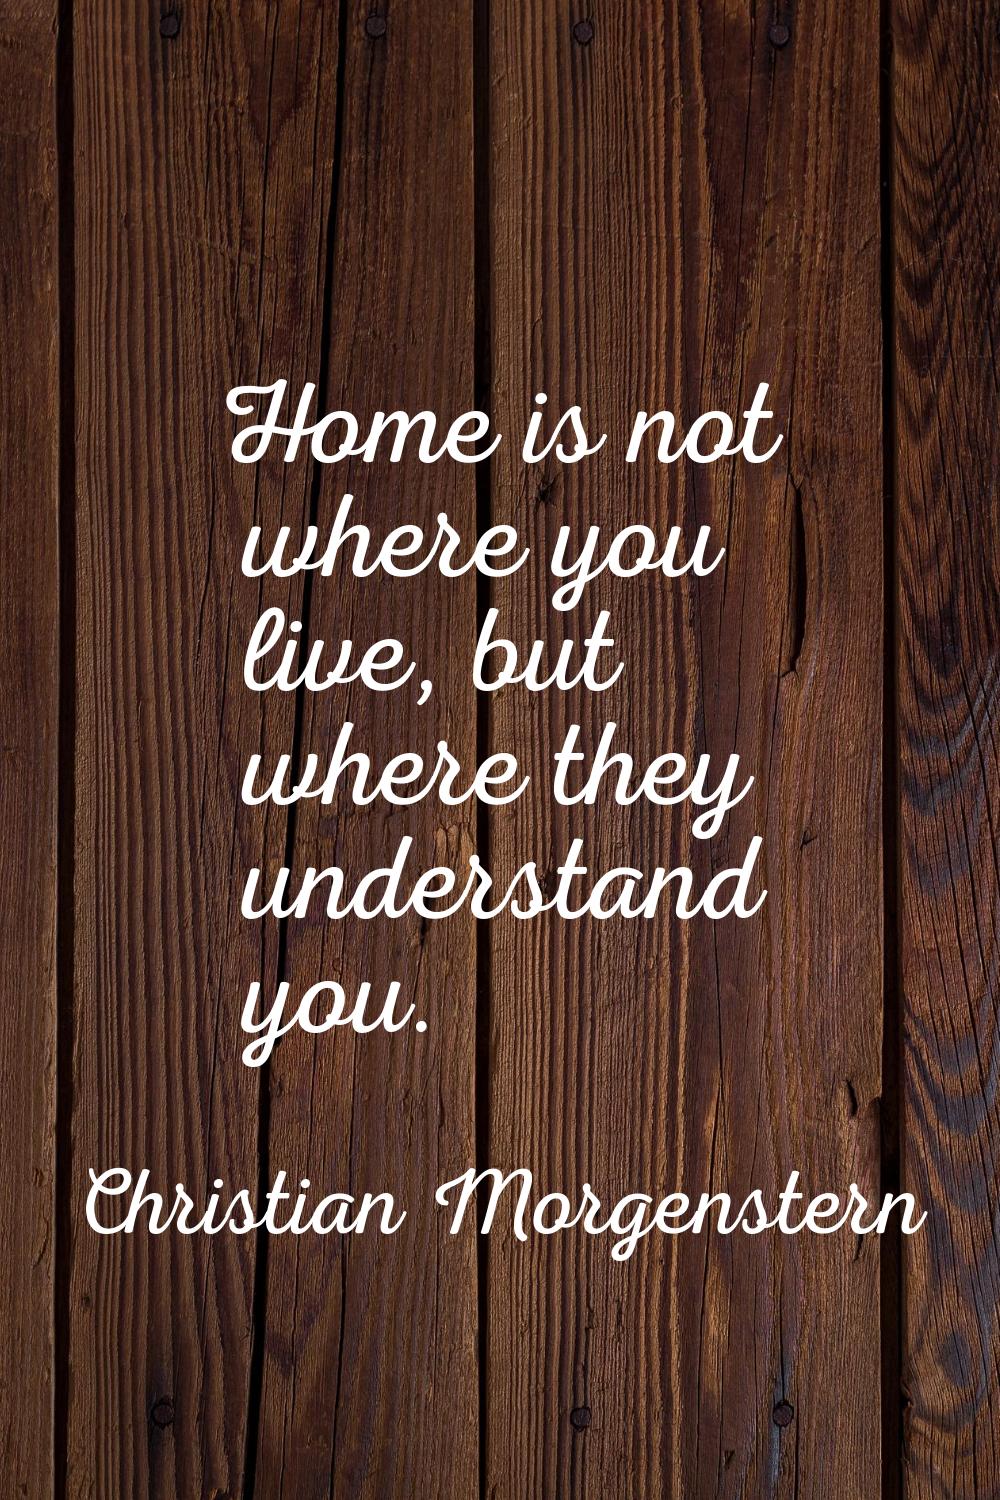 Home is not where you live, but where they understand you.